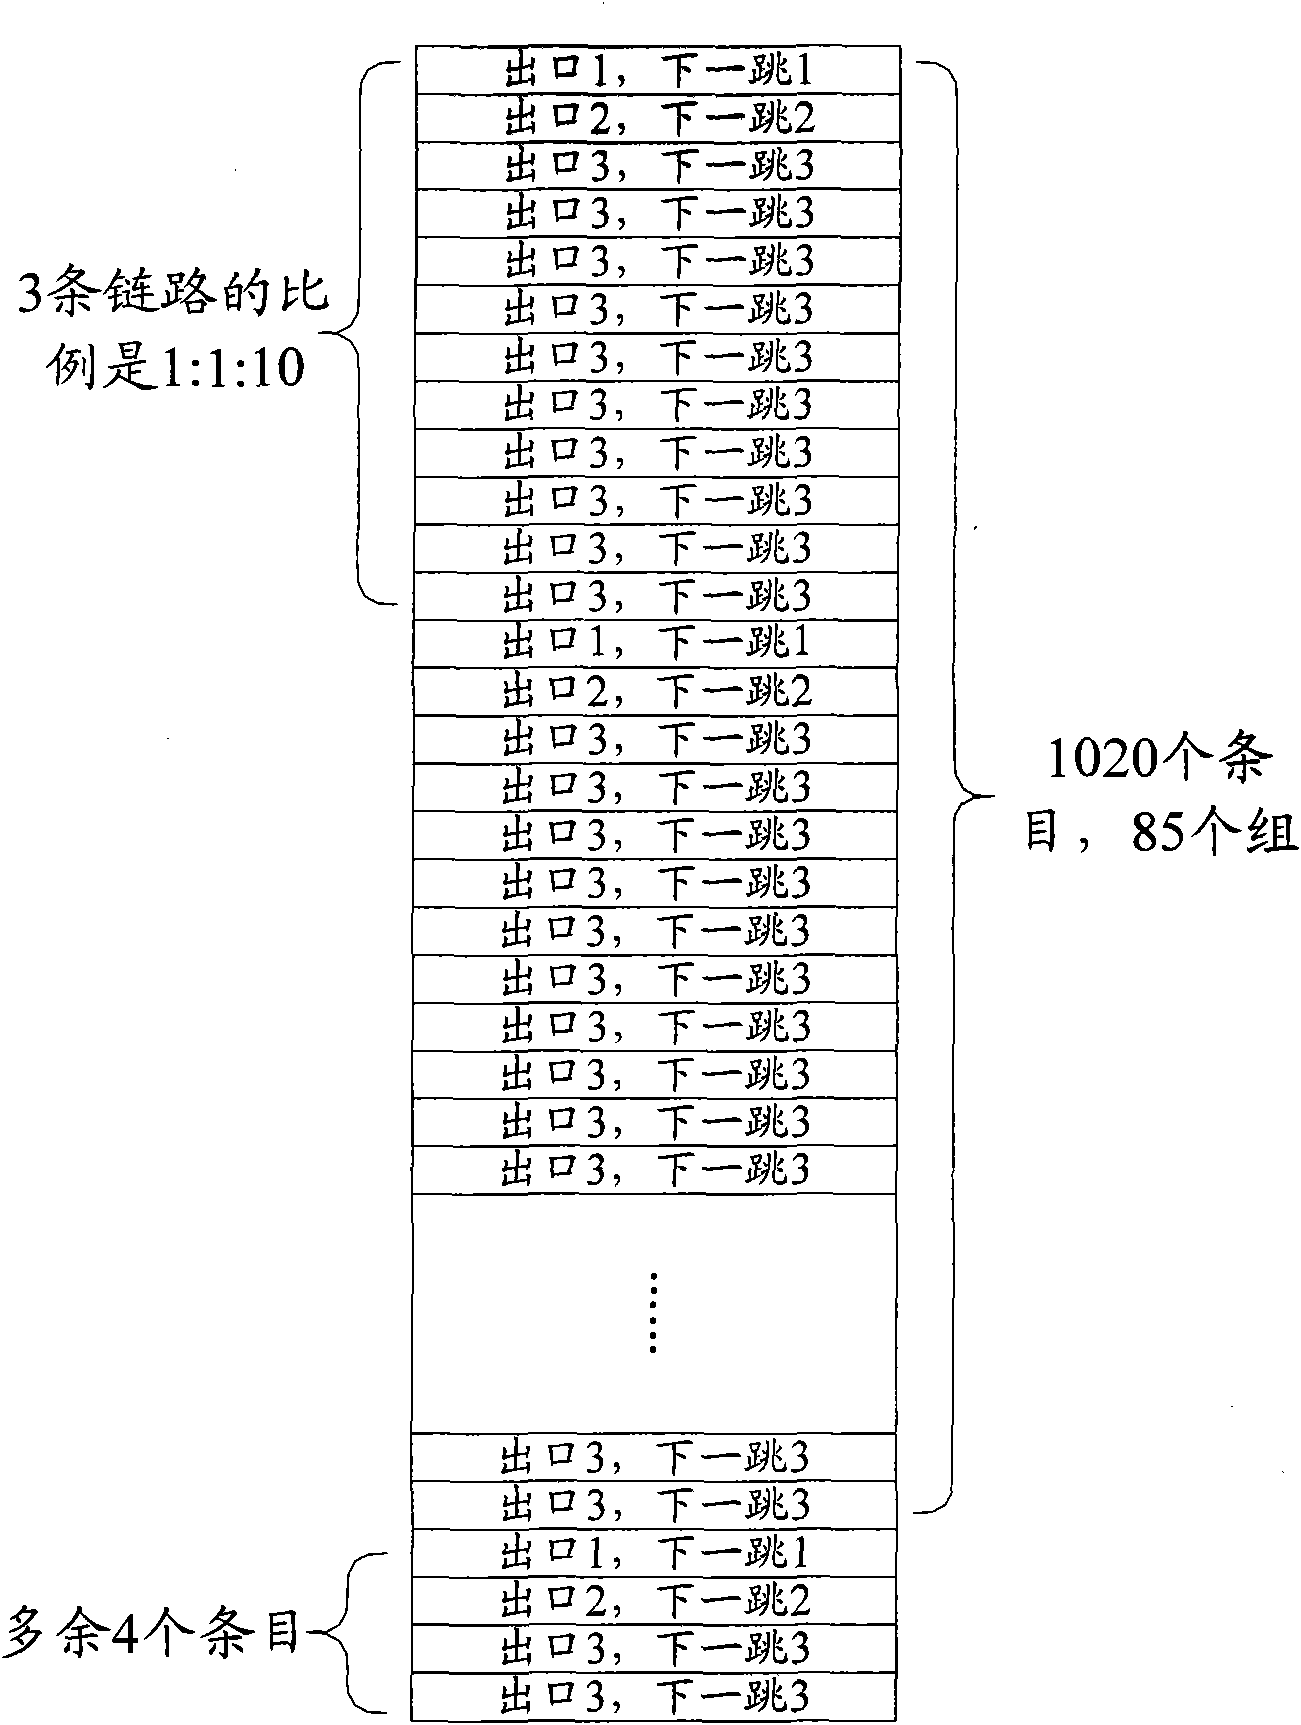 Method and router equipment for realizing load sharing